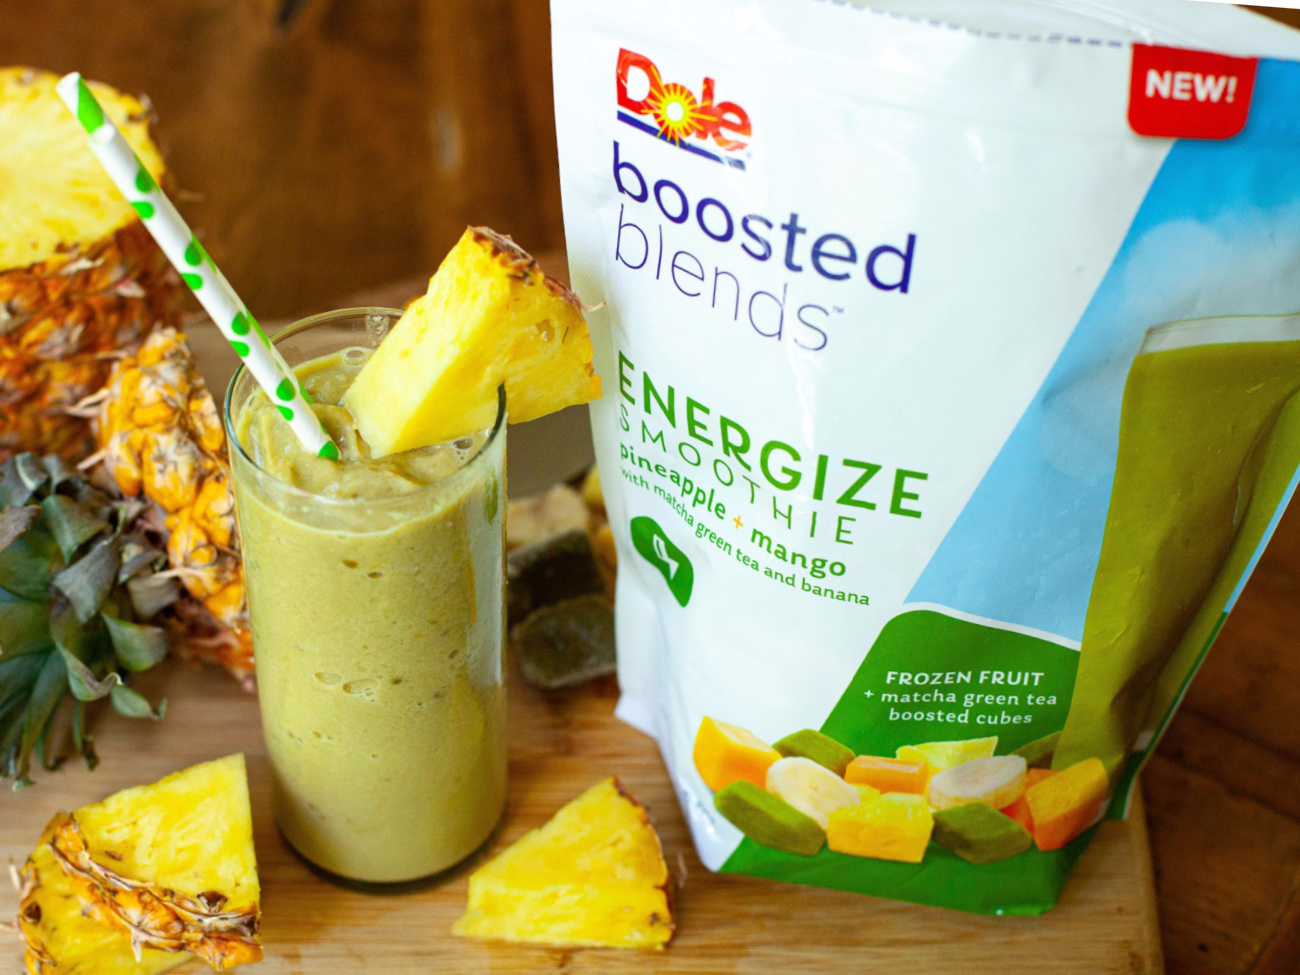 Find Two Varieties Of Delicious Dole Boosted Blends® Smoothies On Sale NOW At Publix